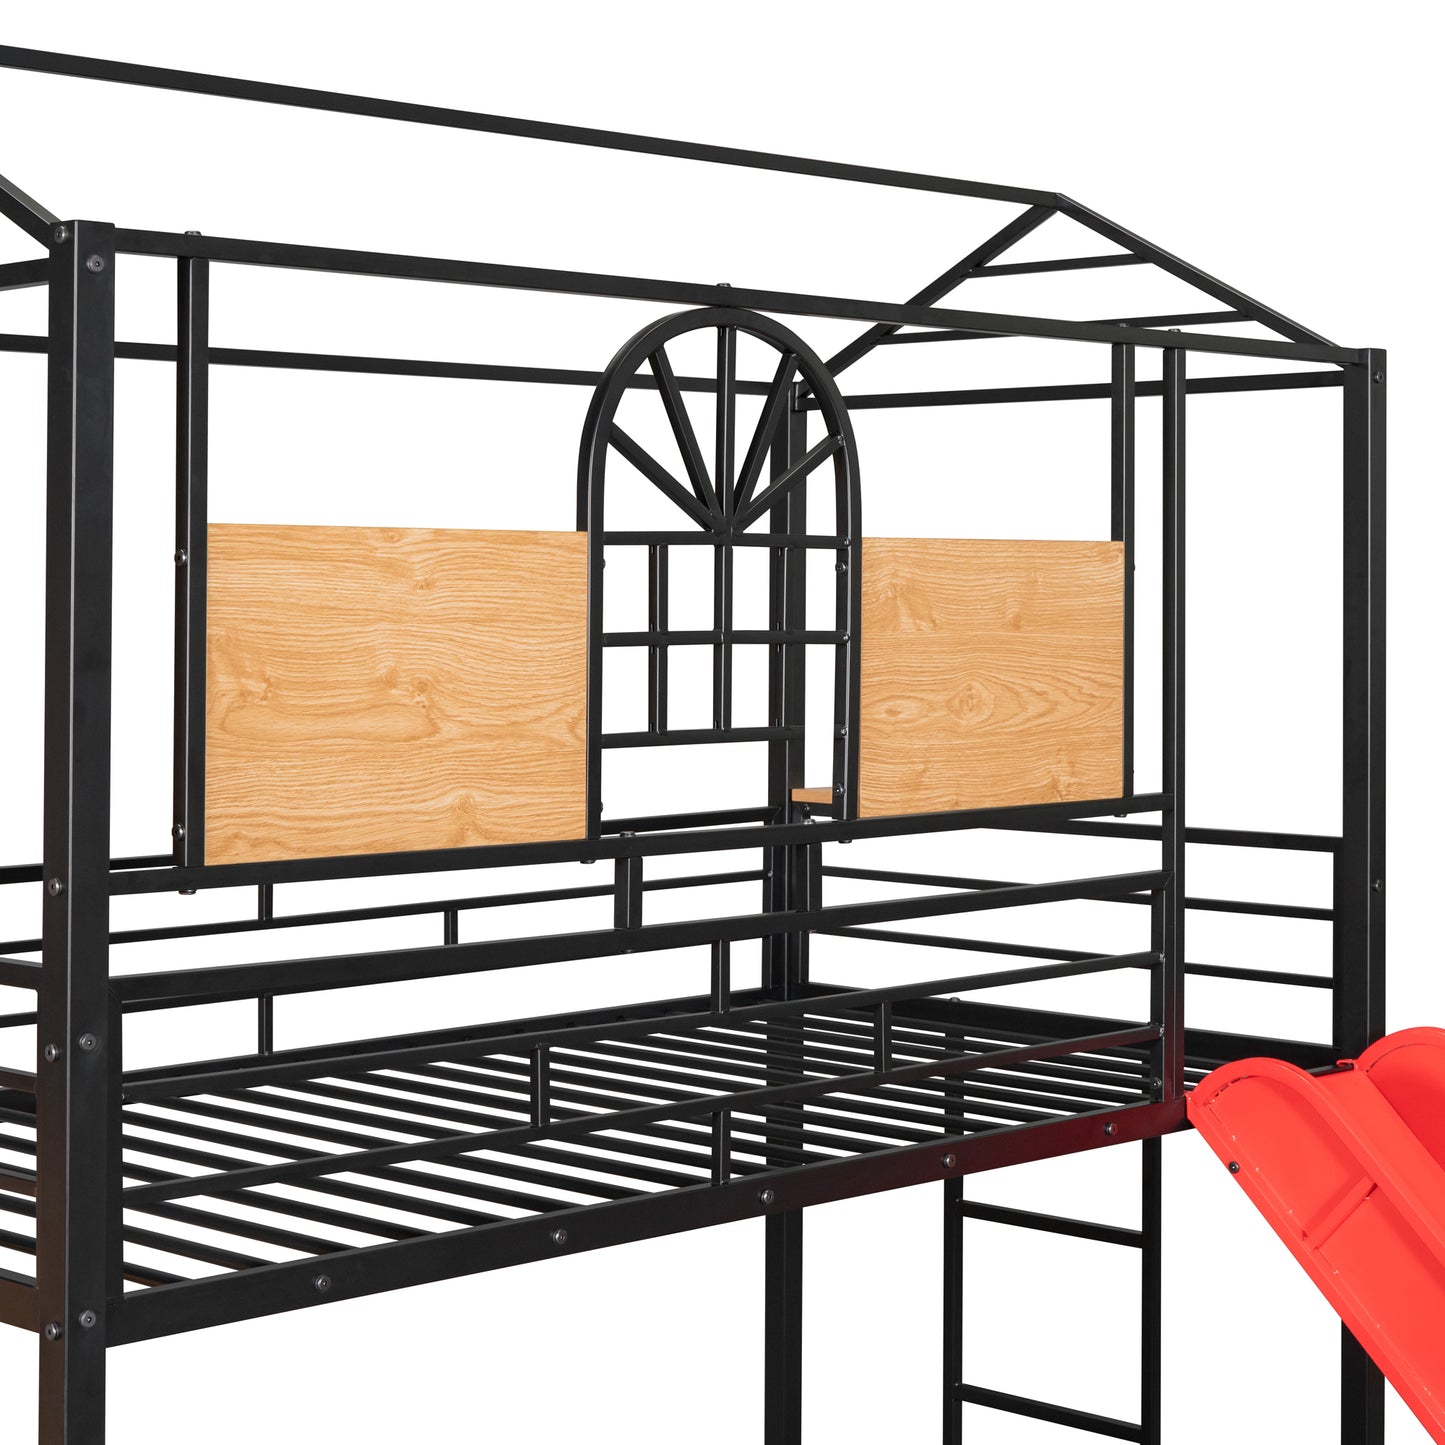 Twin Over Twin Metal Bunk Bed, Metal Housebed with Slide and Storage Stair, Black with Red Slide